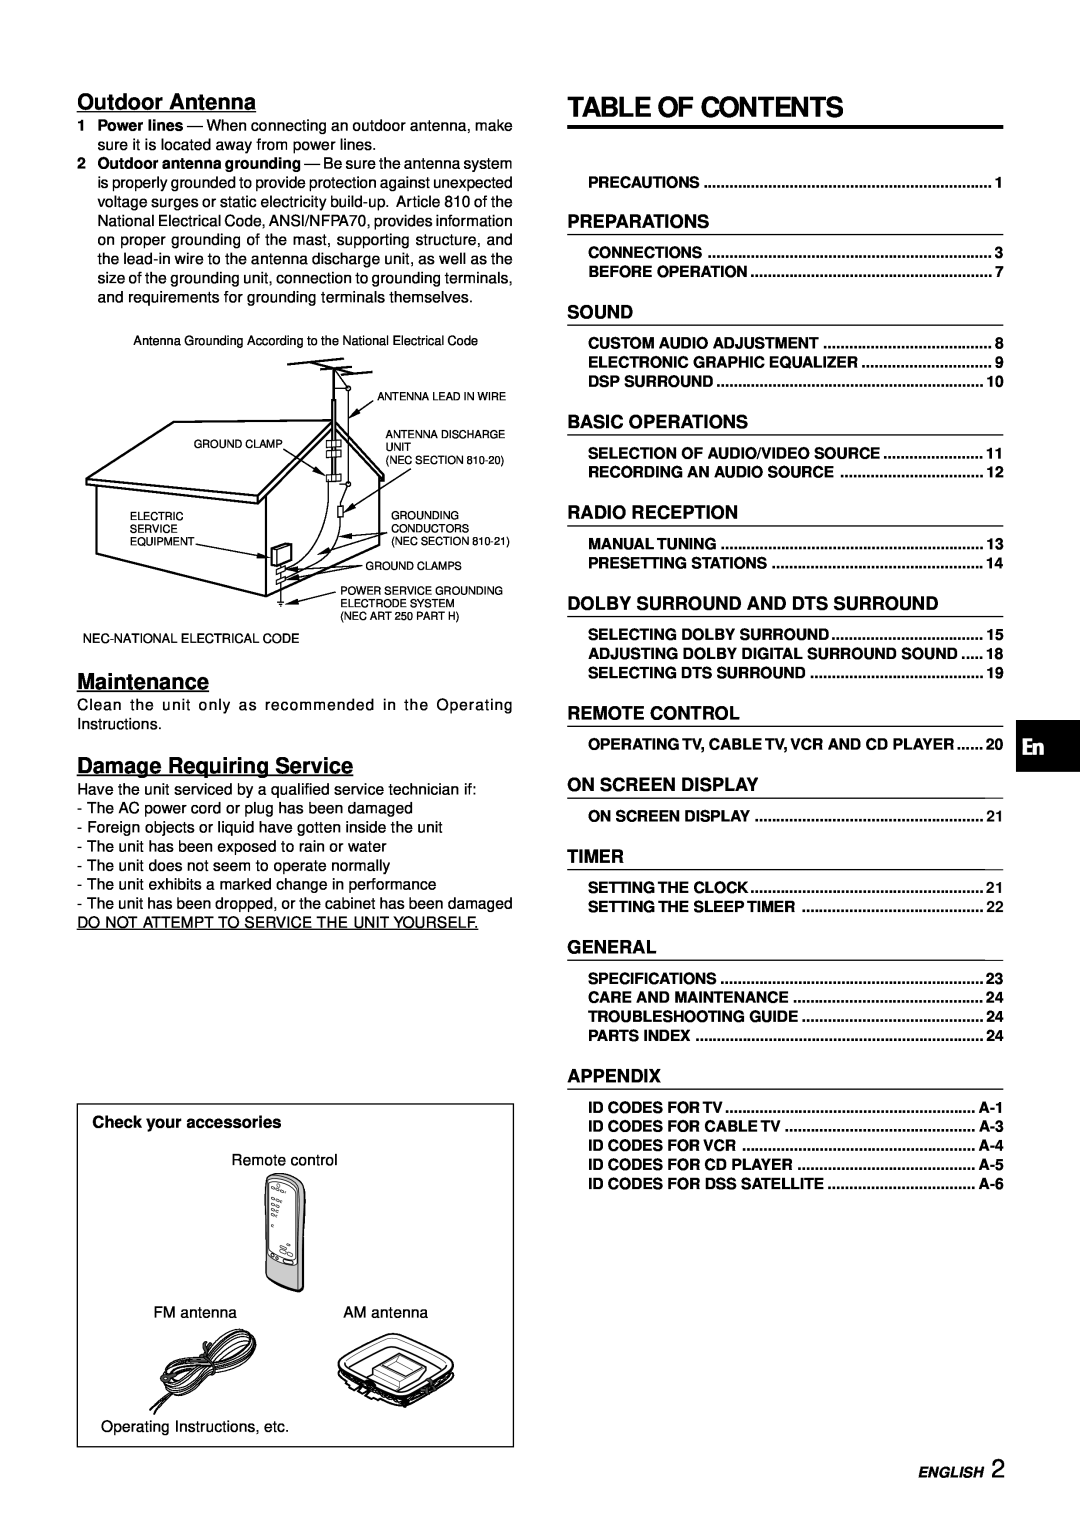 Aiwa AV-D97 Table Of Contents, Outdoor Antenna, Maintenance, Damage Requiring Service, Preparations, Sound, Remote Control 